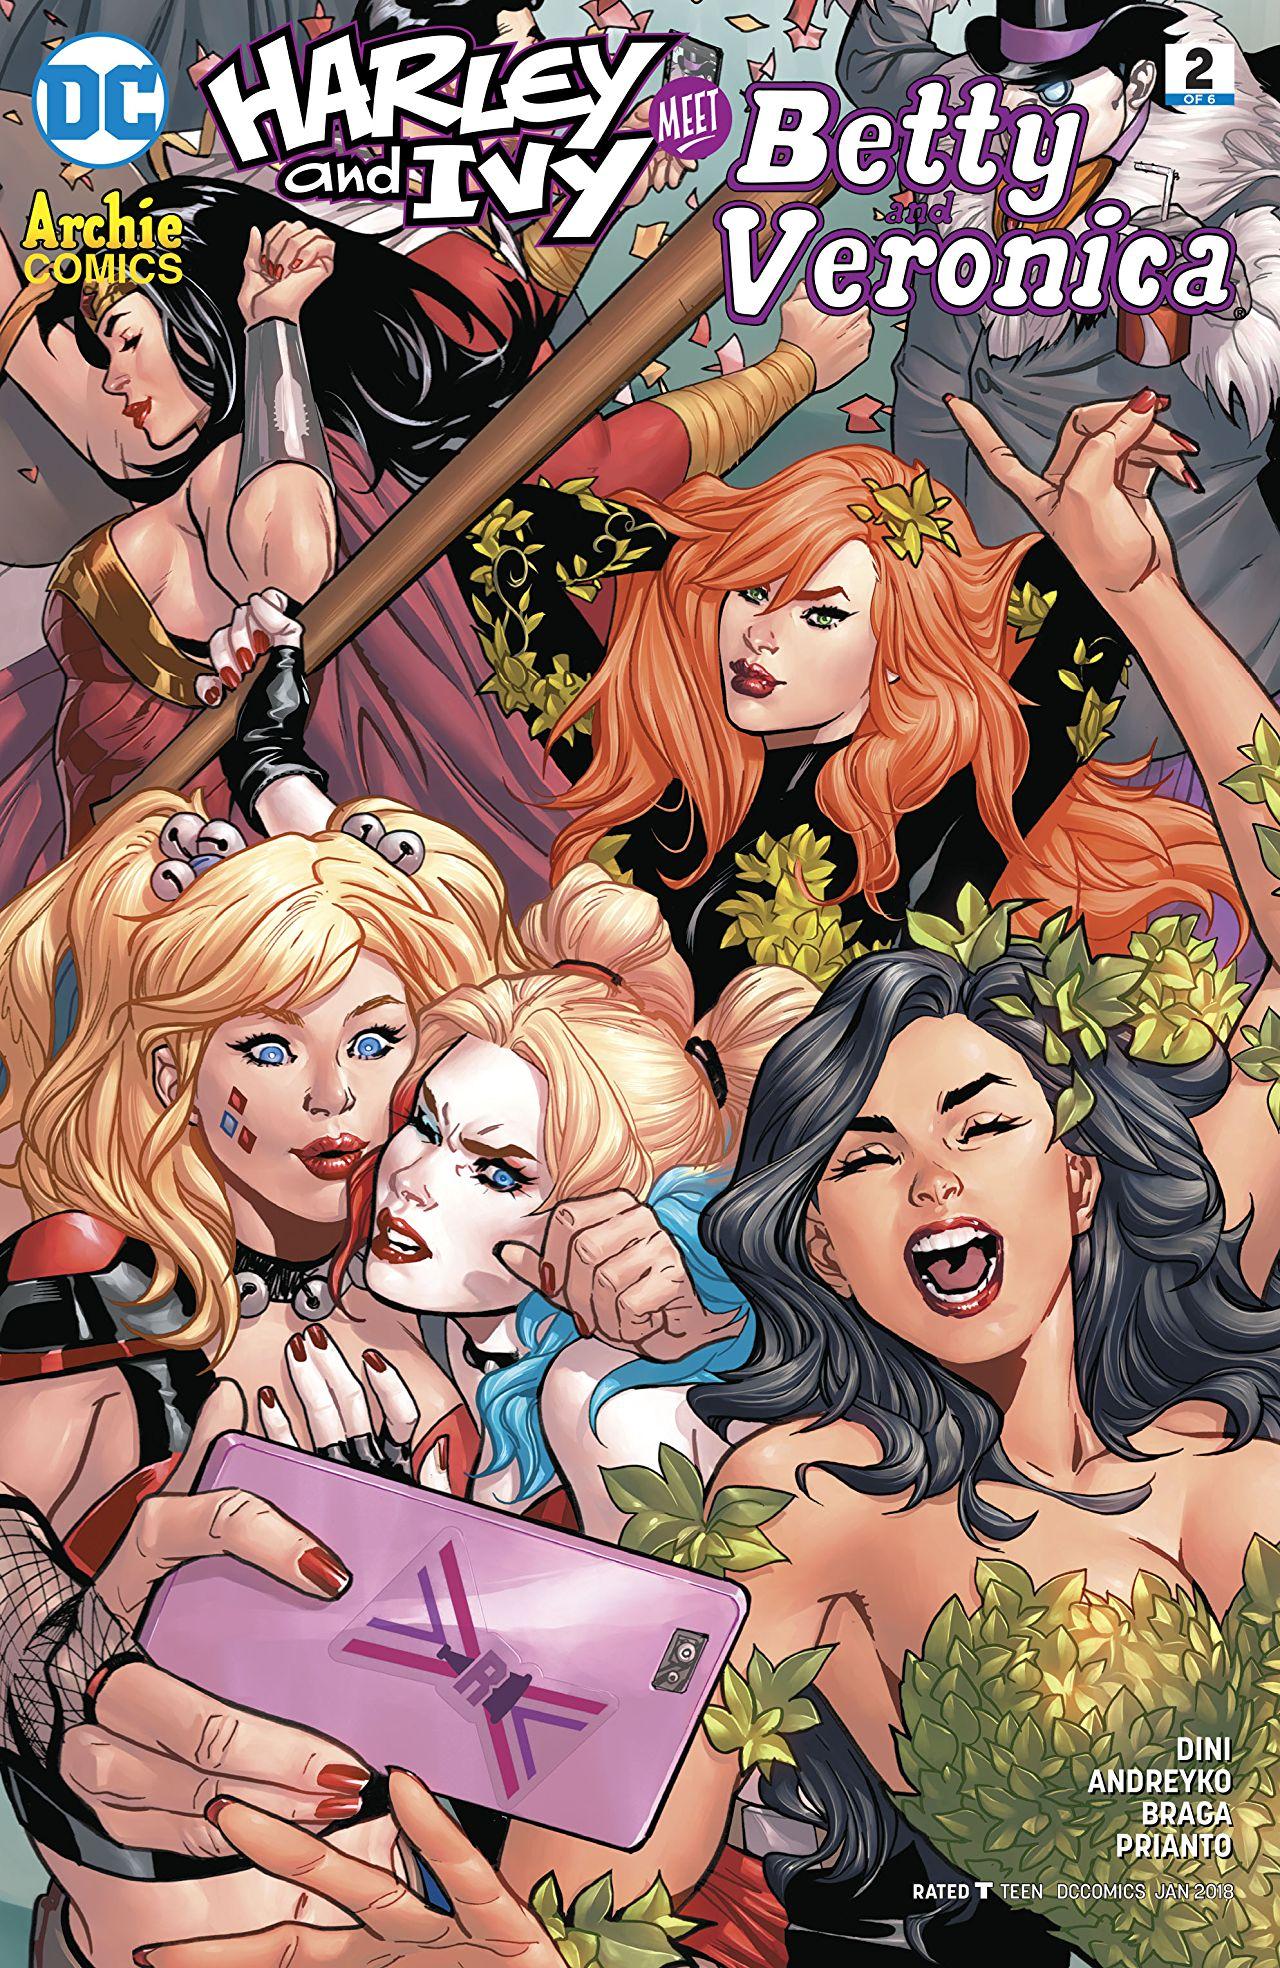 Harley and Ivy Meet Betty and Veronica Vol. 1 #2